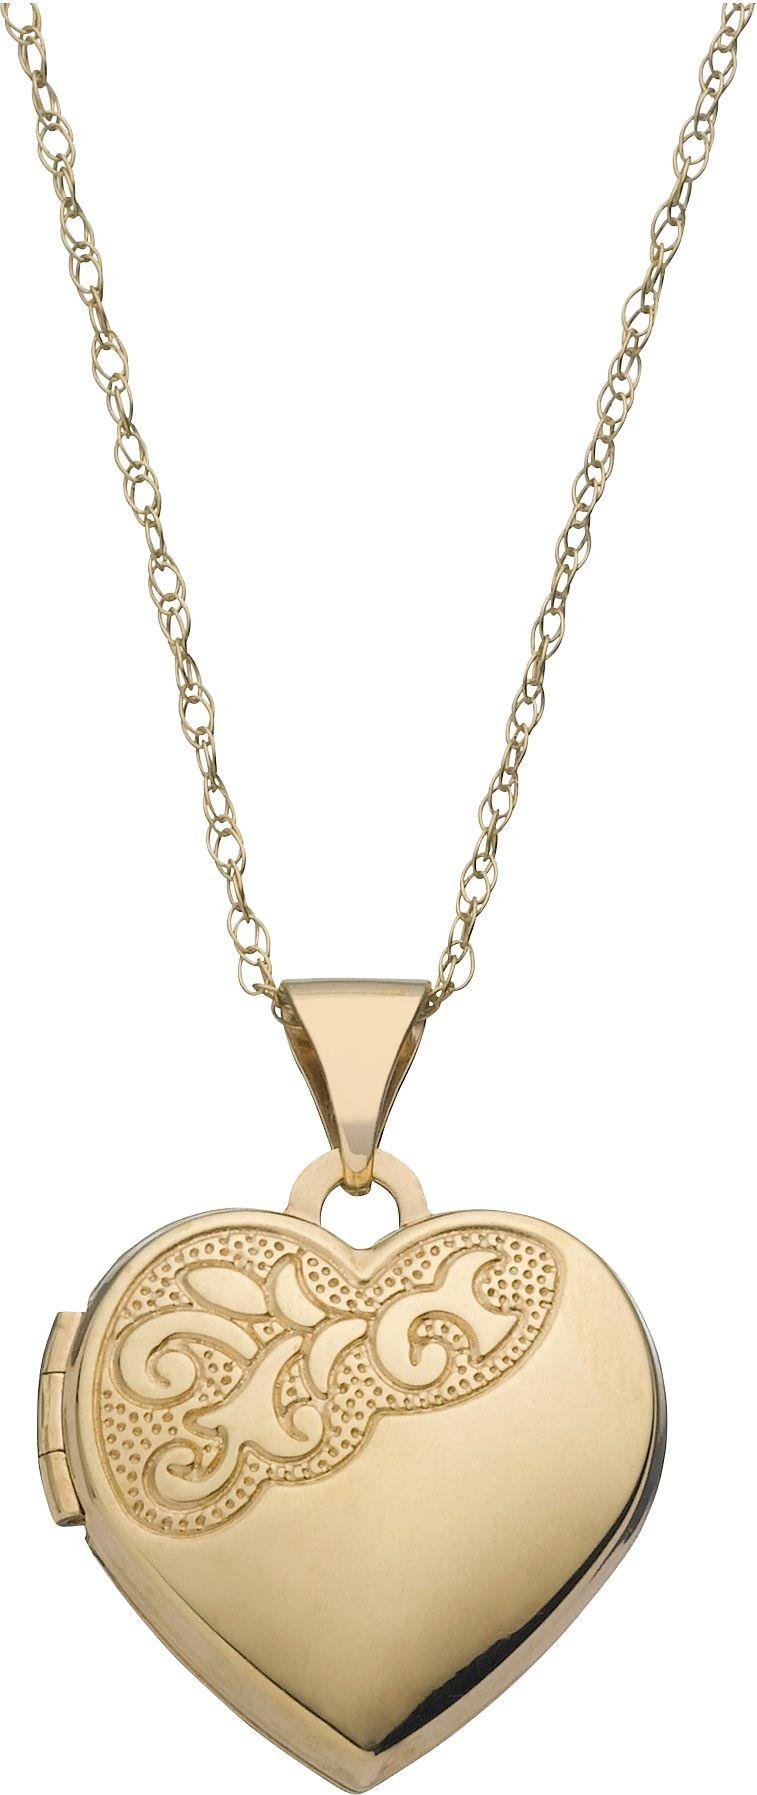 Moon & Back 9ct Gold Heart Locket Review